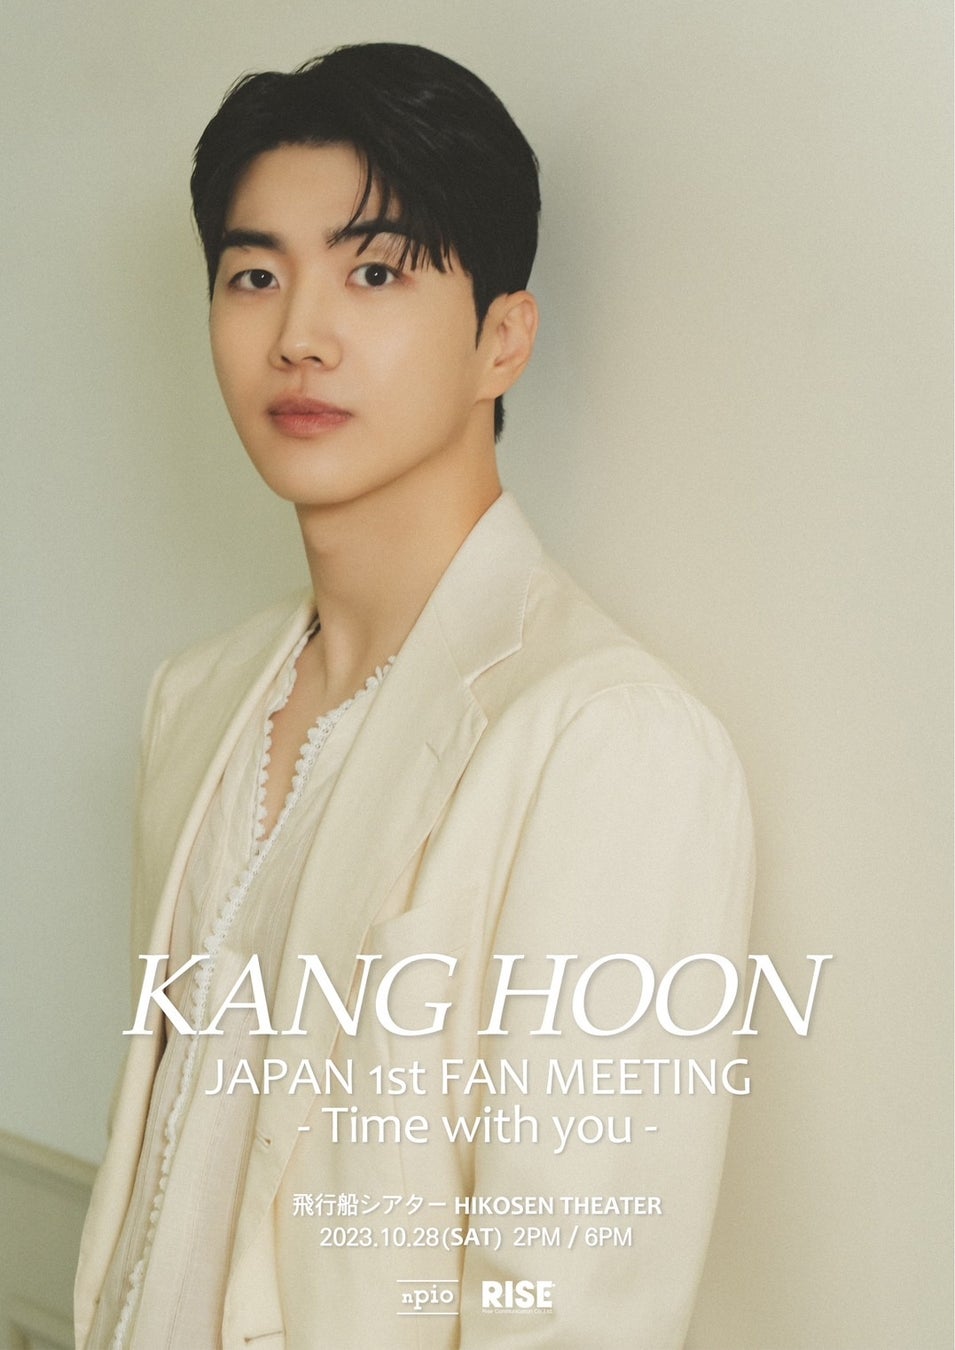 「KANG HOON JAPAN 1st FANMEETING -Time with you-」チケット一般発売スタート！のサブ画像1